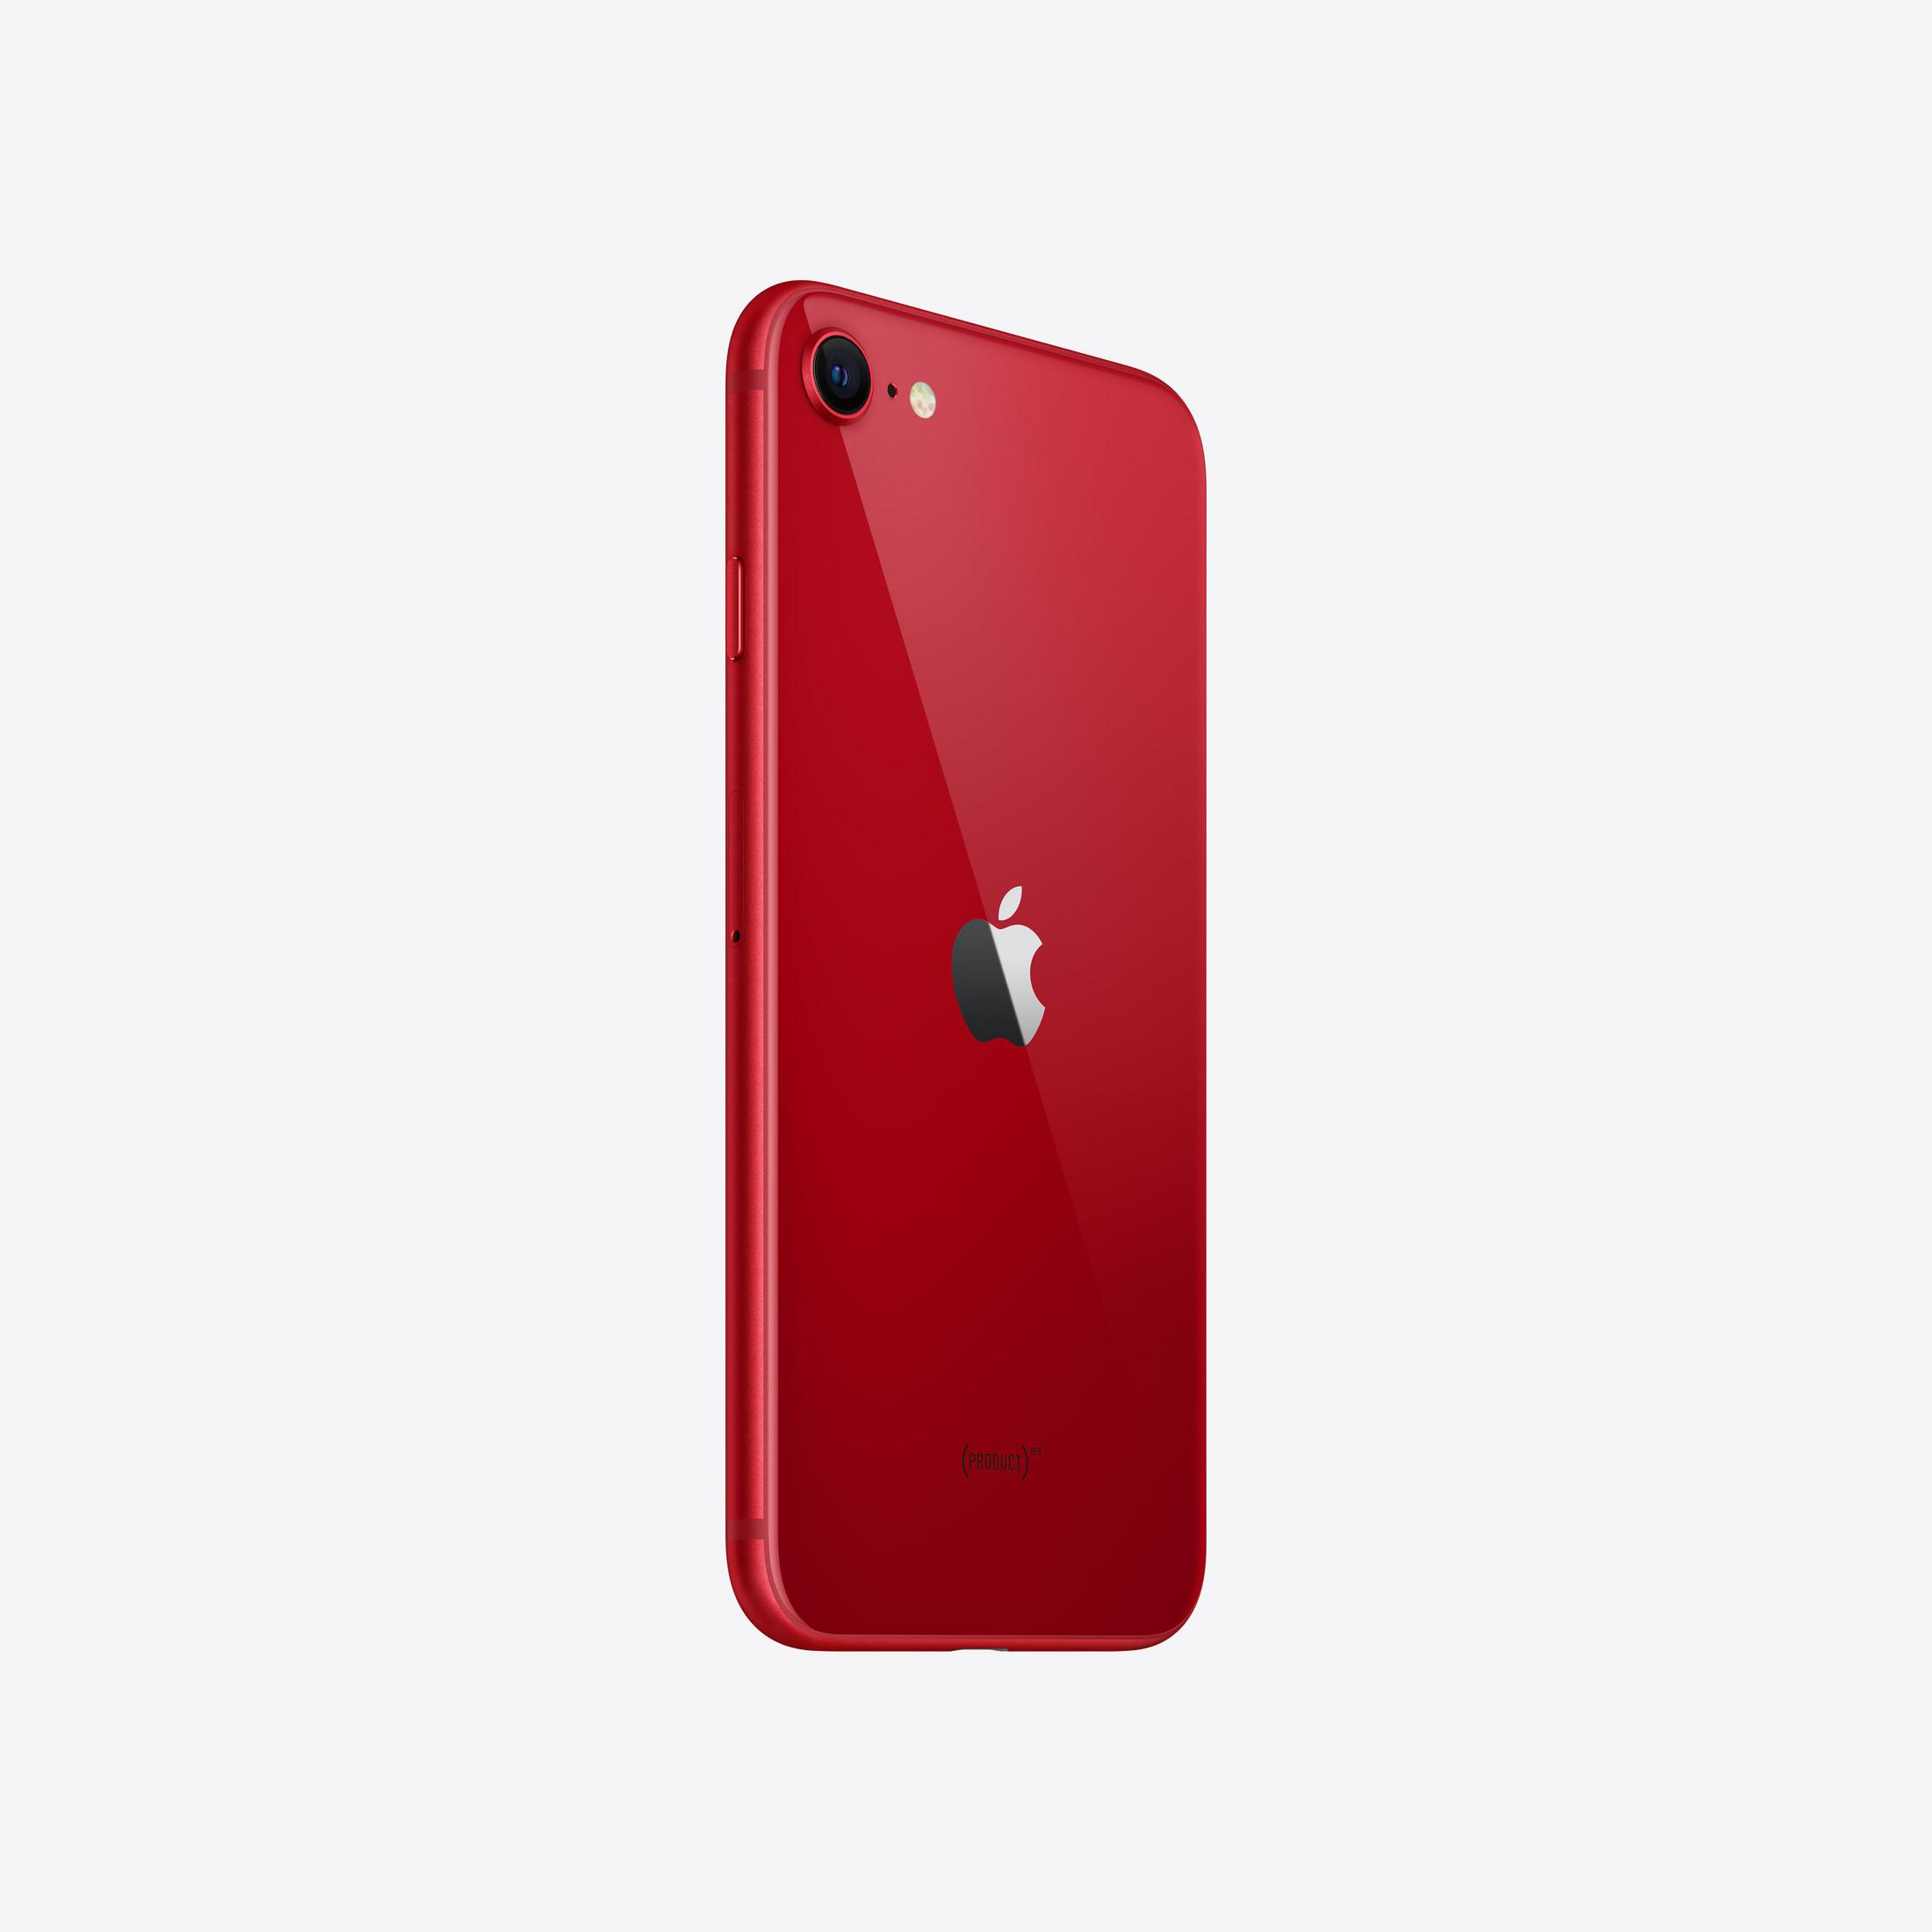 APPLE IPHONE SE 256GB (Product) (PRODUCT) 256 RED Red GB